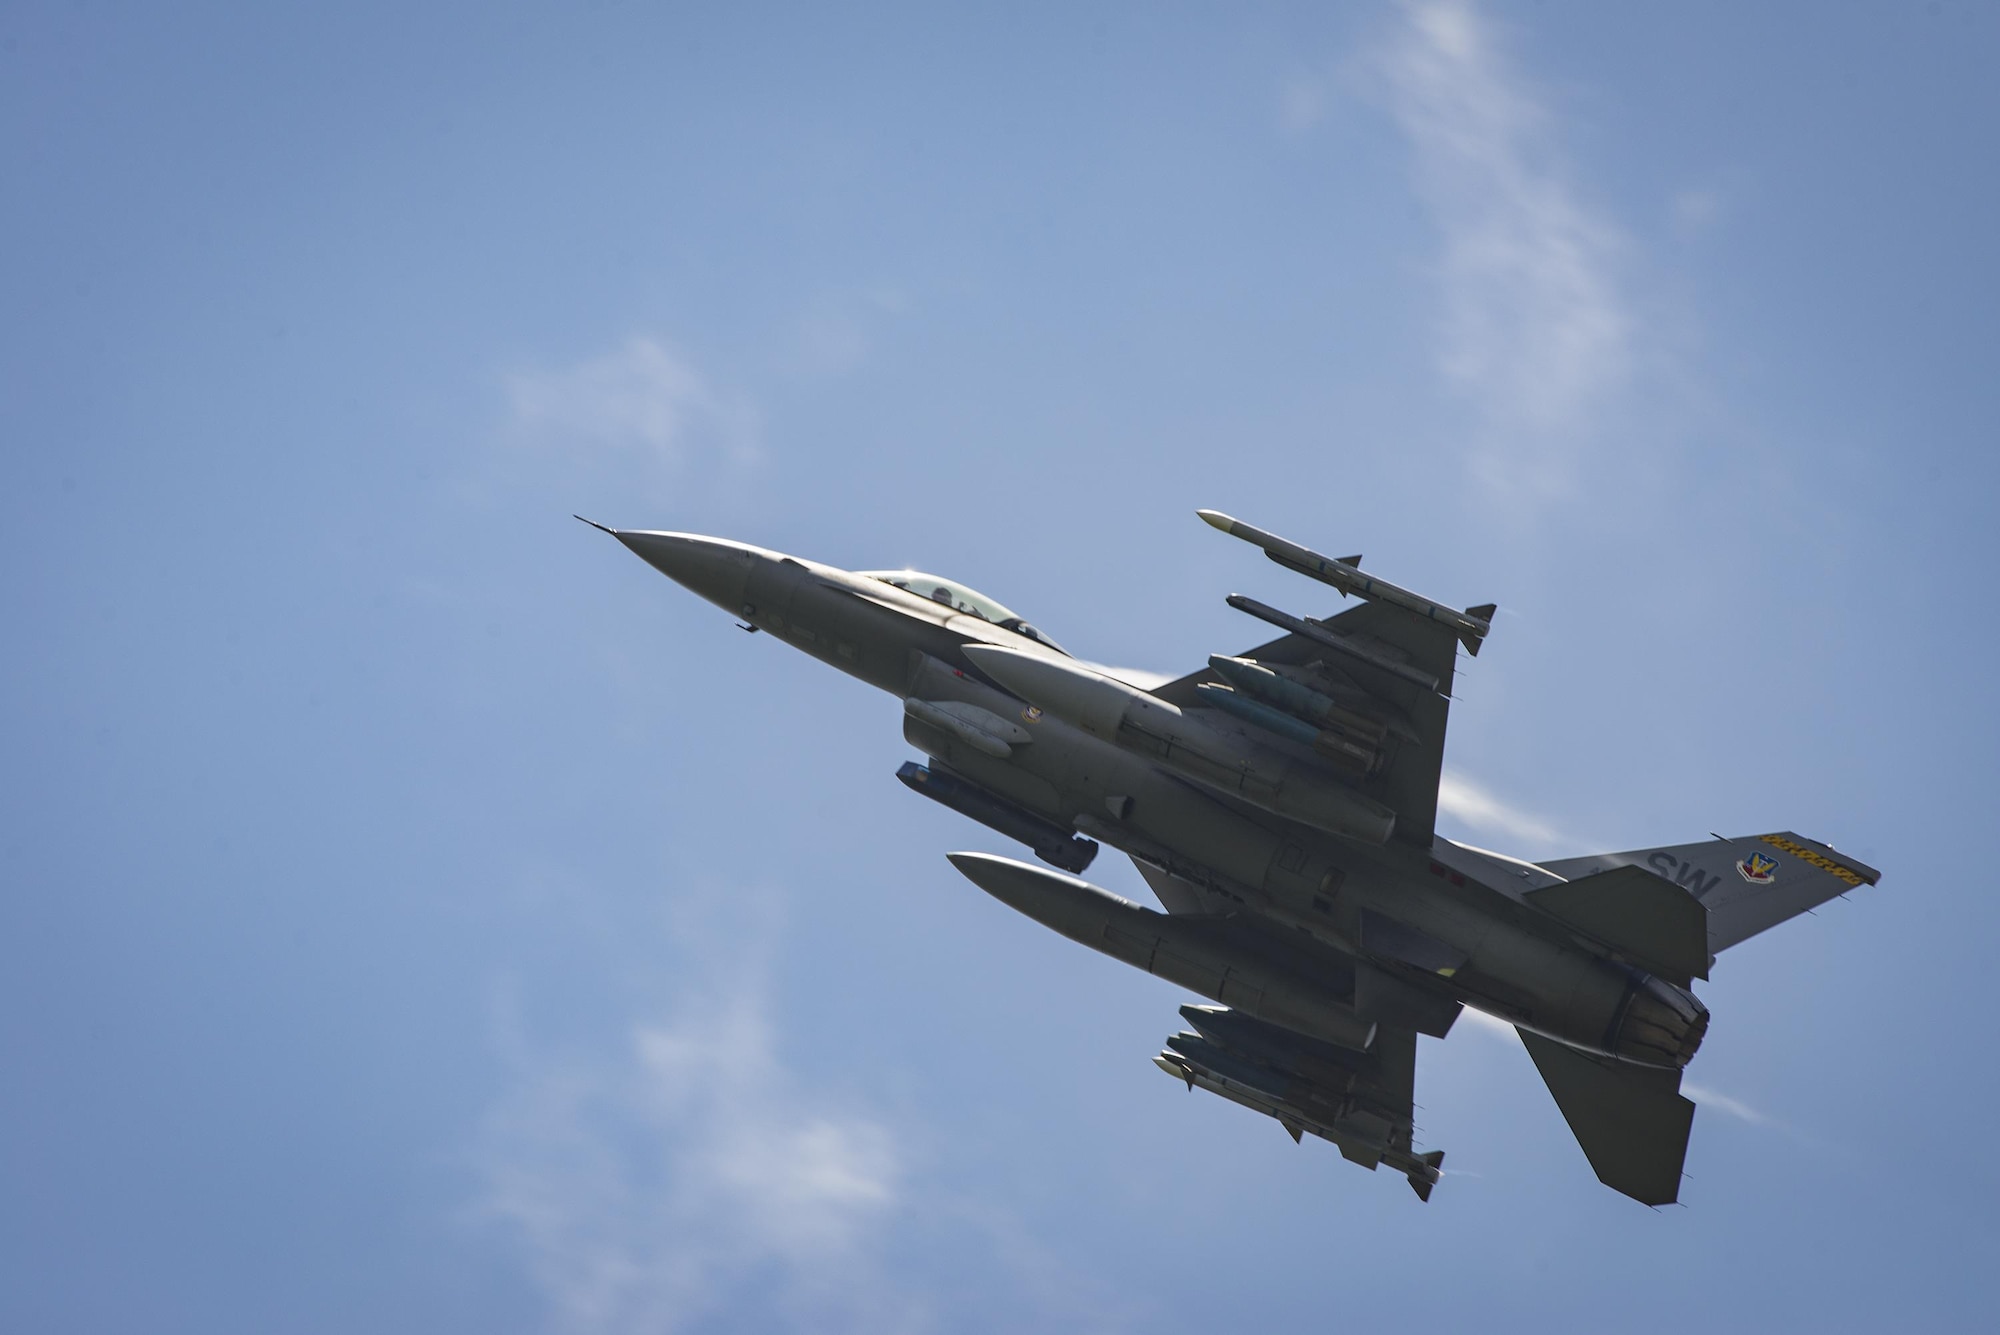 An F-16 Fighting Falcon asends over Grand Bay Bombing and Gunnery Range at Moody Air Force Base, Ga., May 19, 2016. Multiple U.S. Air Force aircraft within Air Combat Command conducted joint aerial training showcasing the aircraft’s tactical air and ground maneuvers, as well as its weapons capabilities. (U.S. Air Force photo by Airman Daniel Snider/Released)